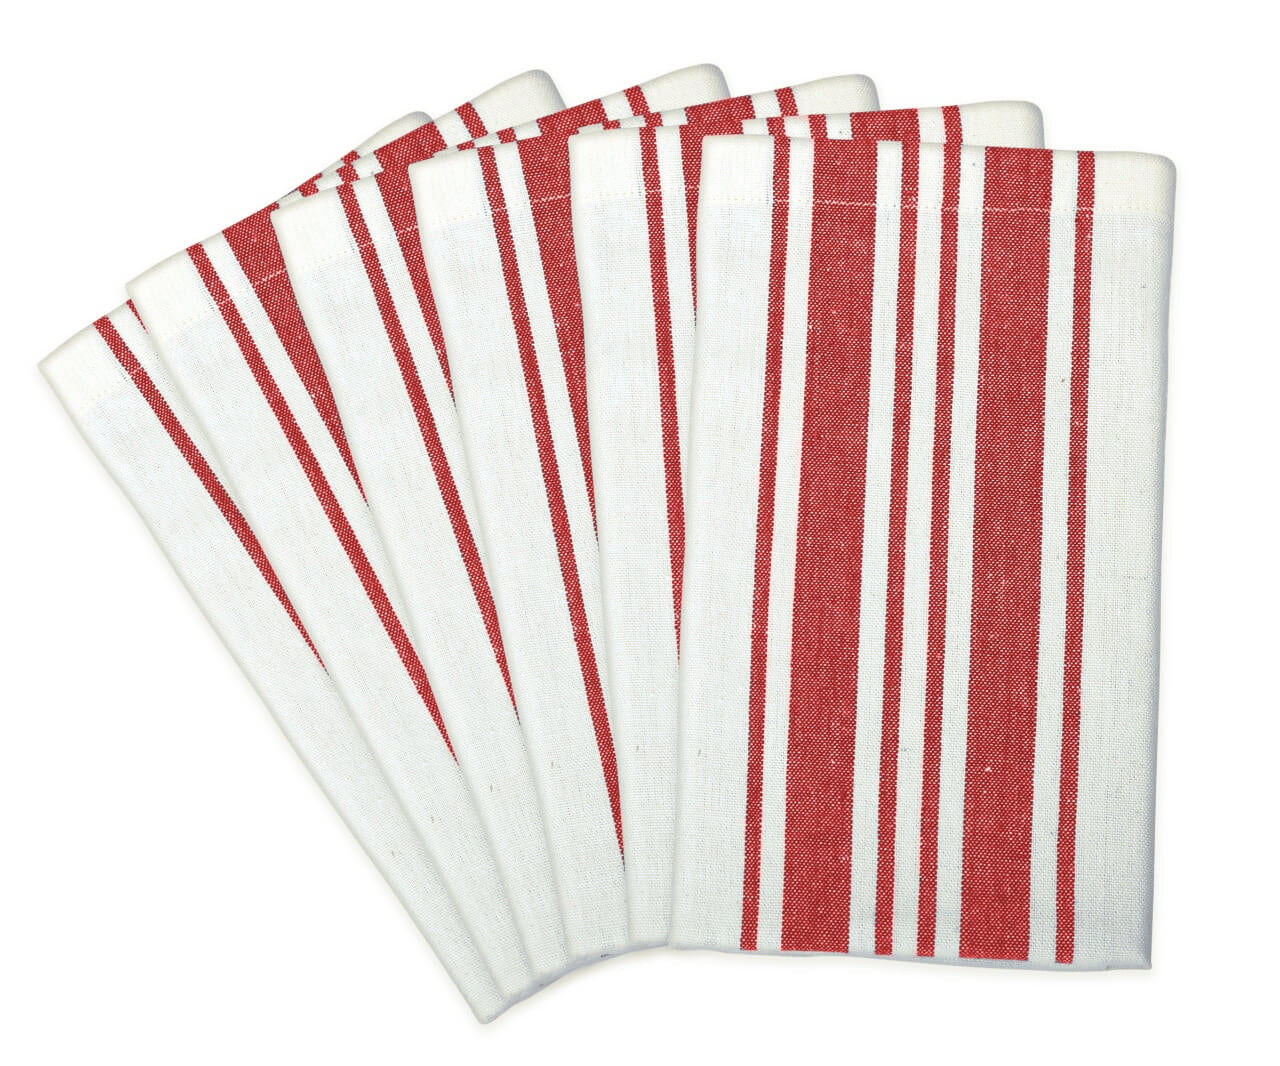 Set of four restaurant napkins with red and white stripes